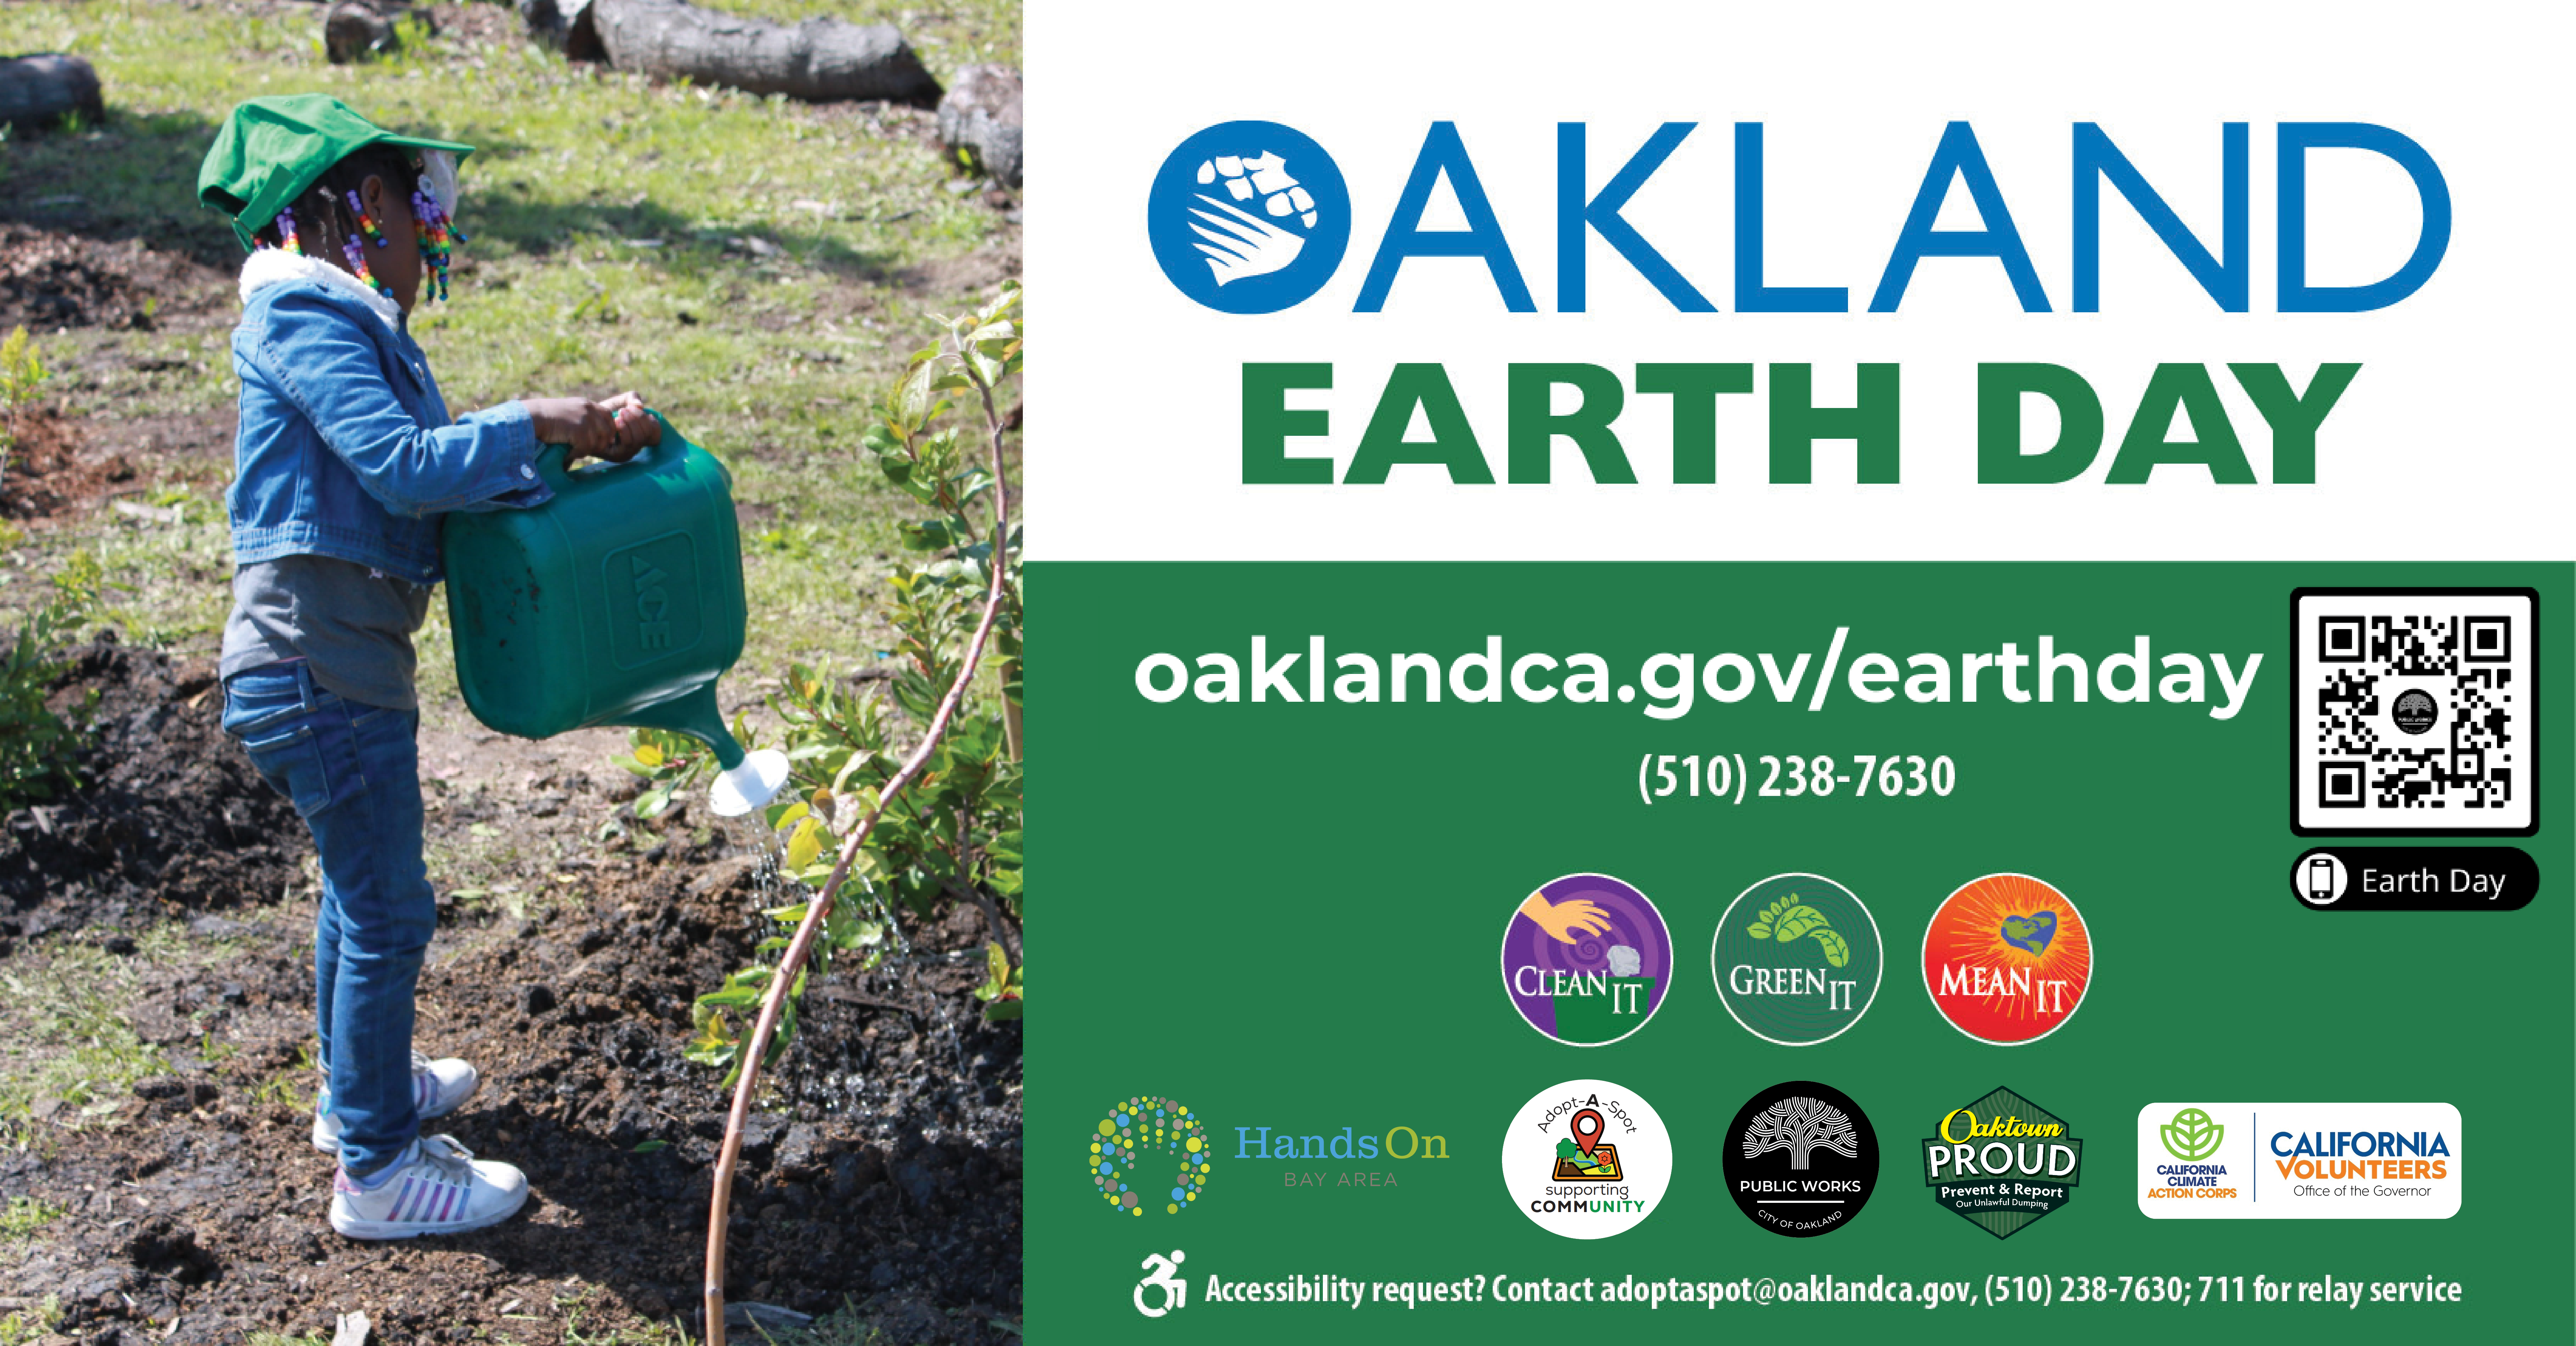 Alt Text: Oakland Earth Day graphic. Accessibility request? Contact adoptaspot@oakdlandca.gov (510) 238-7630; 711 for relay service